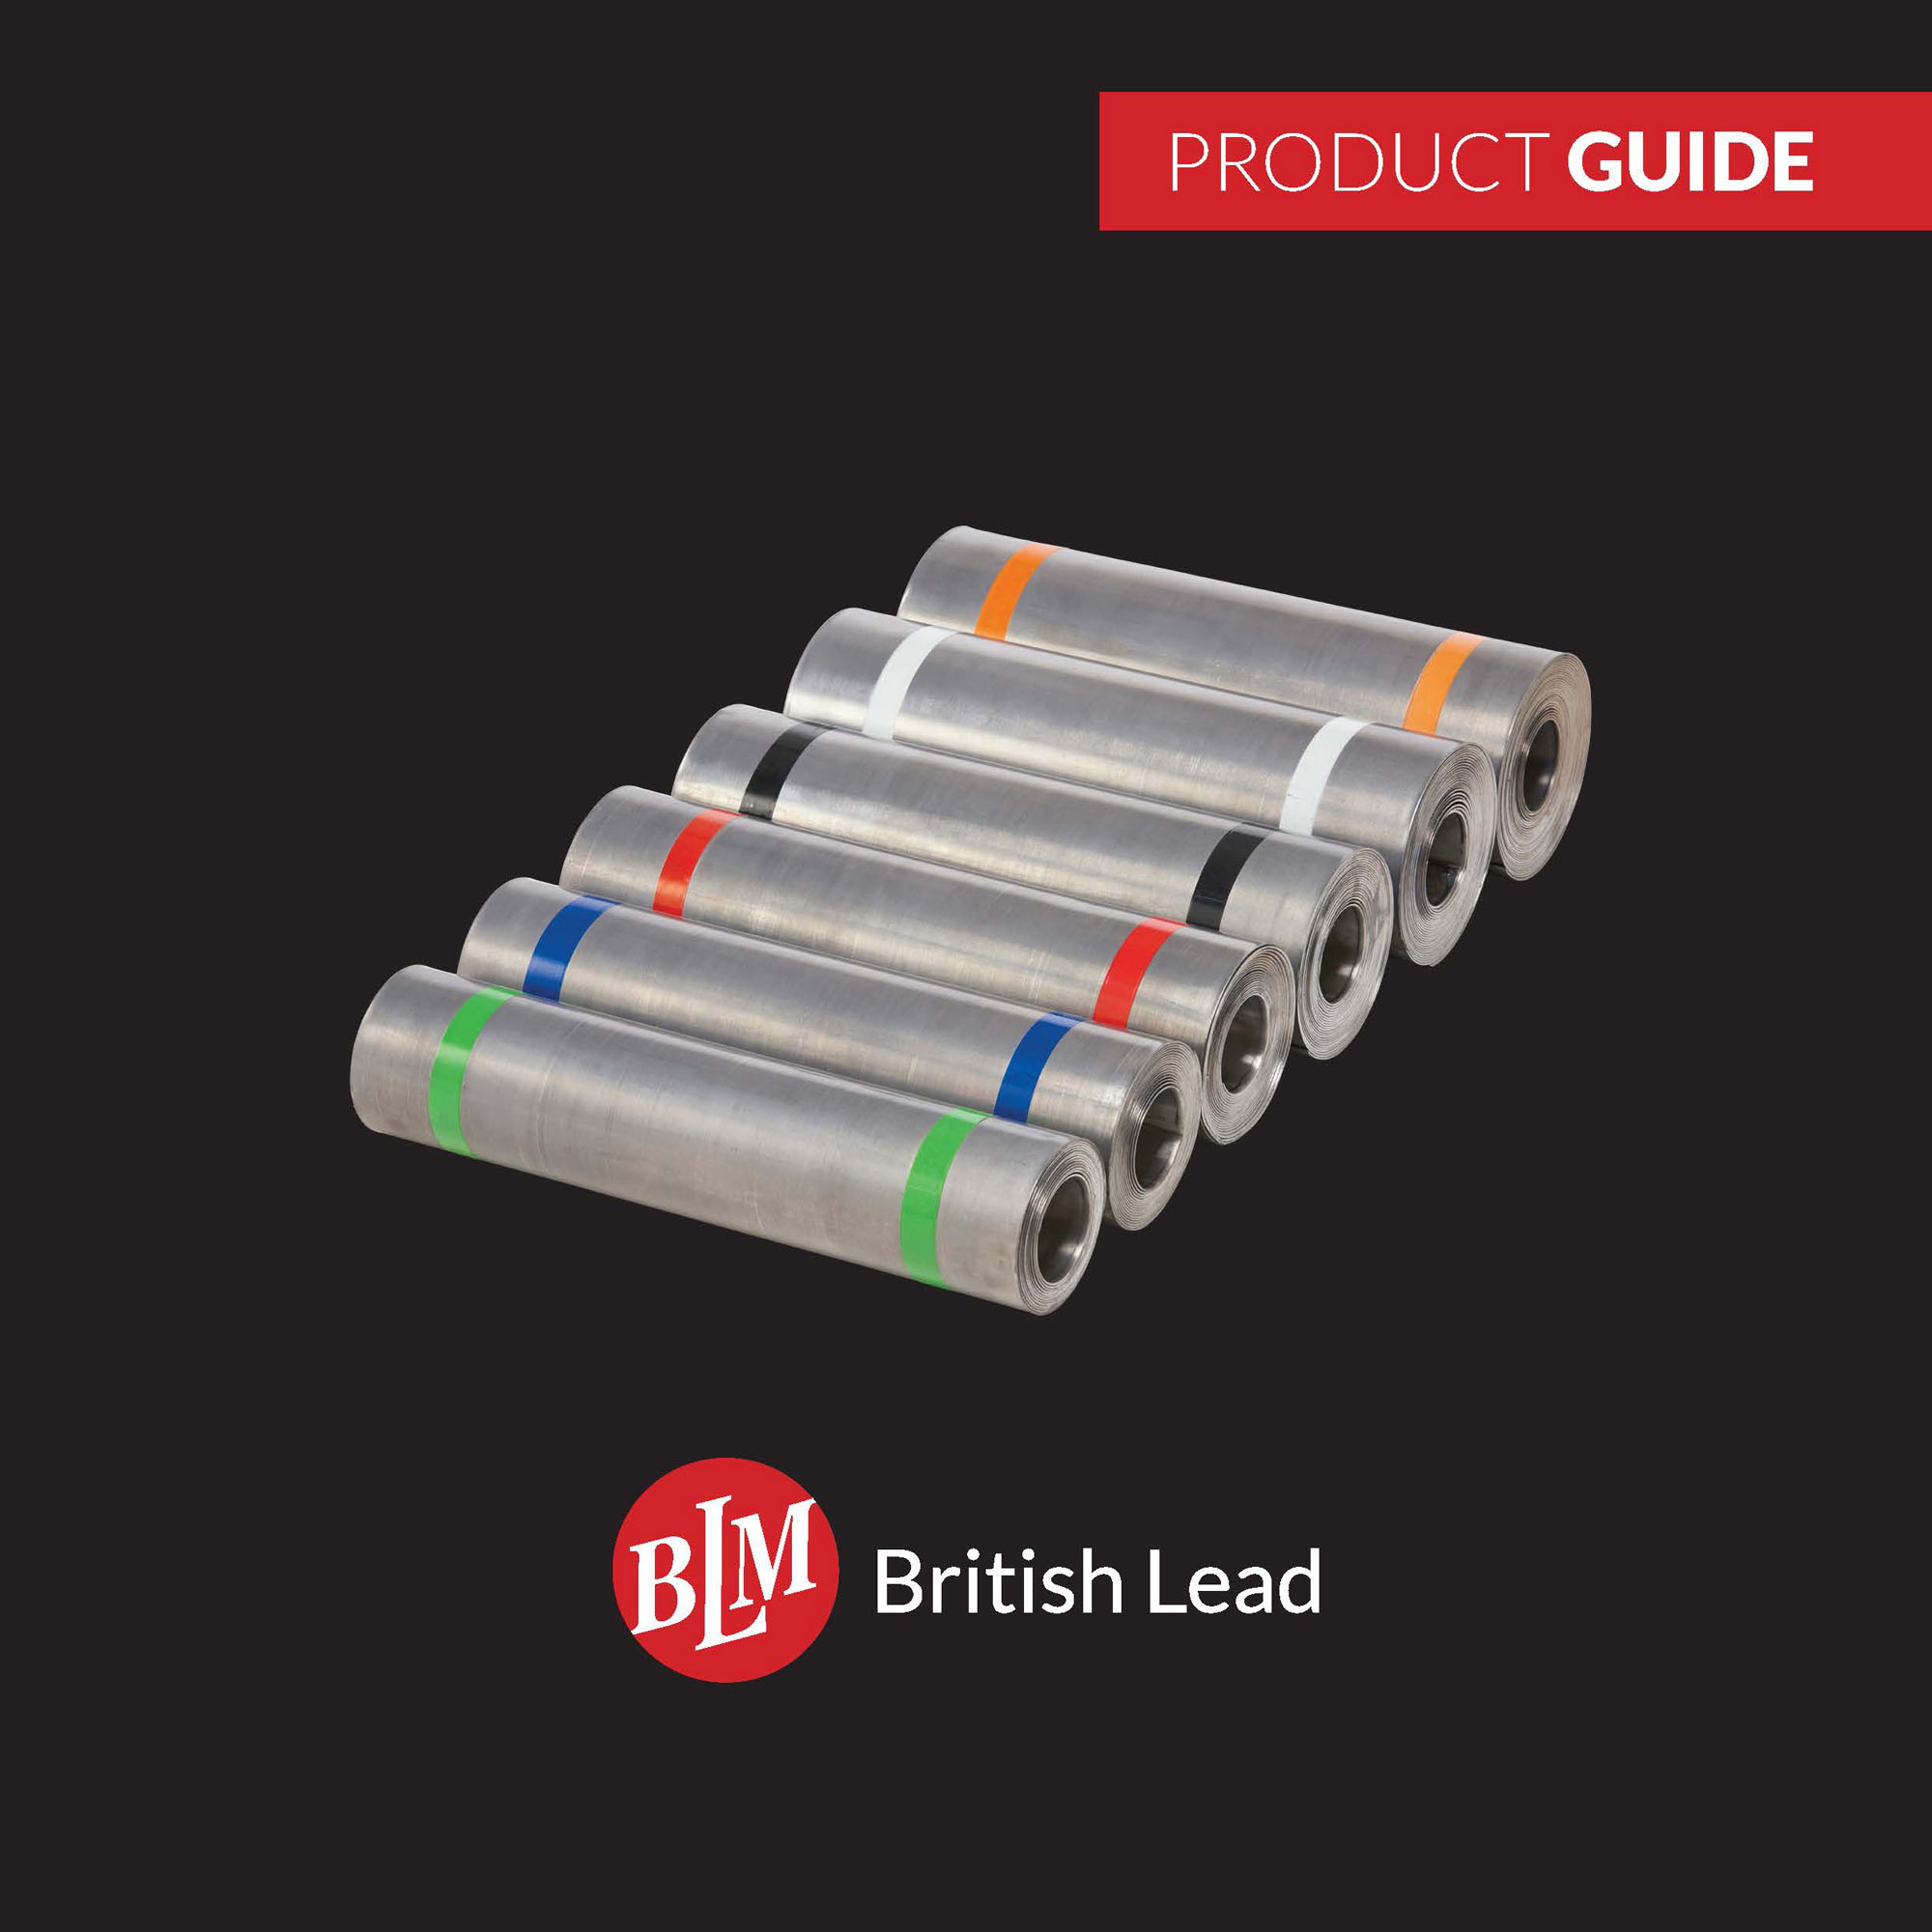 British_Lead_Product_Guide1.jpg